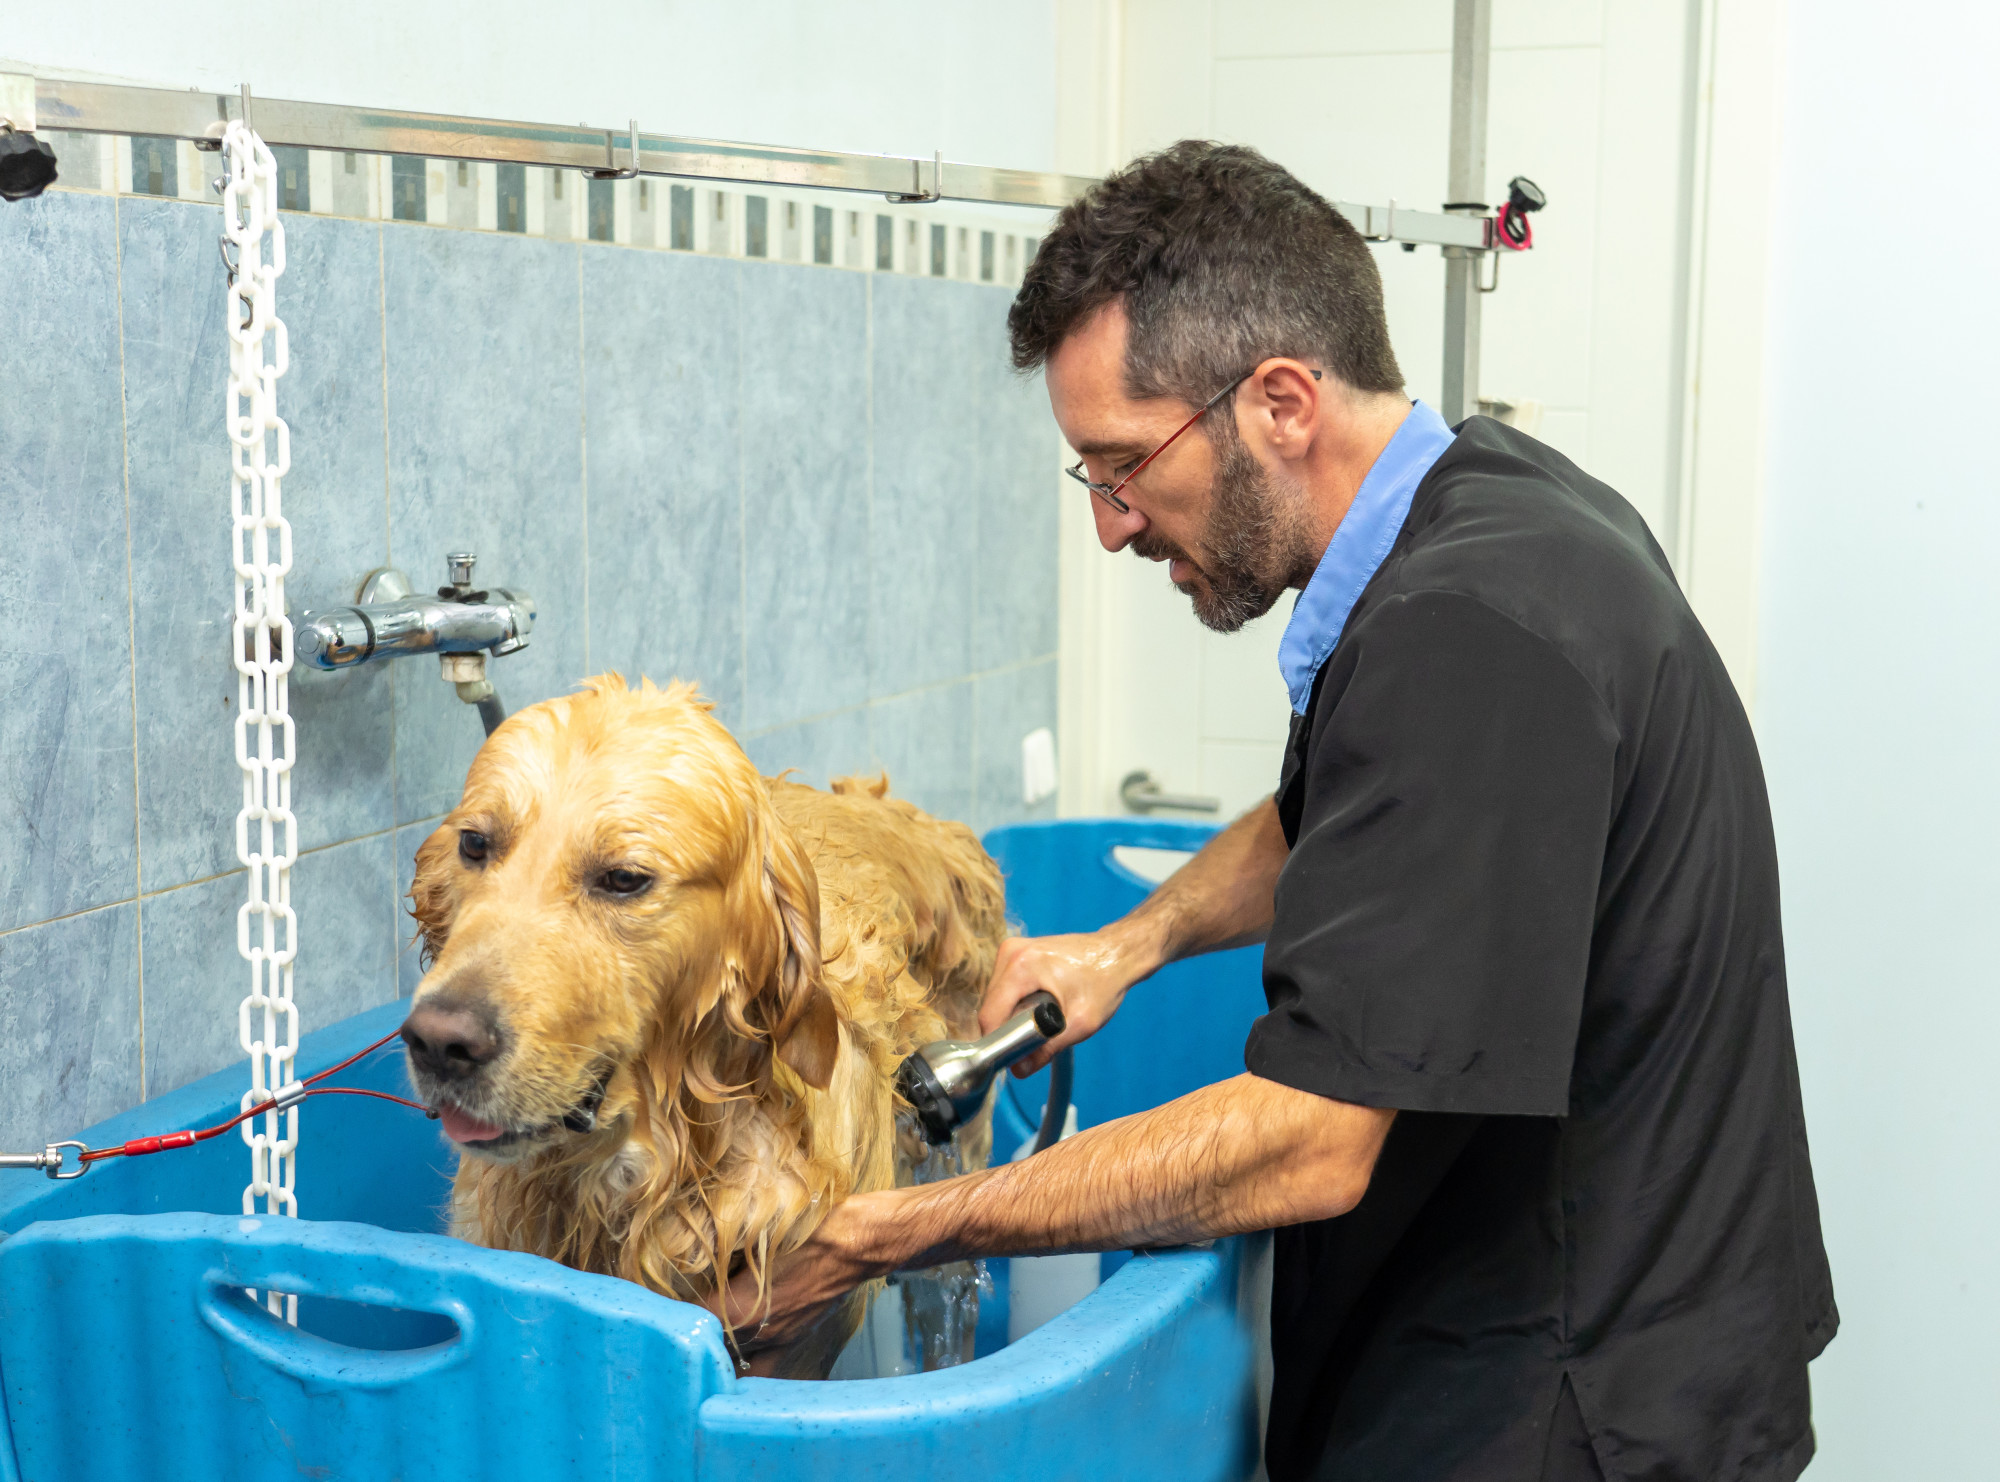 There are a few things you should know about dog grooming. Here's a quick guide on the basics of dog grooming for all pet owners.